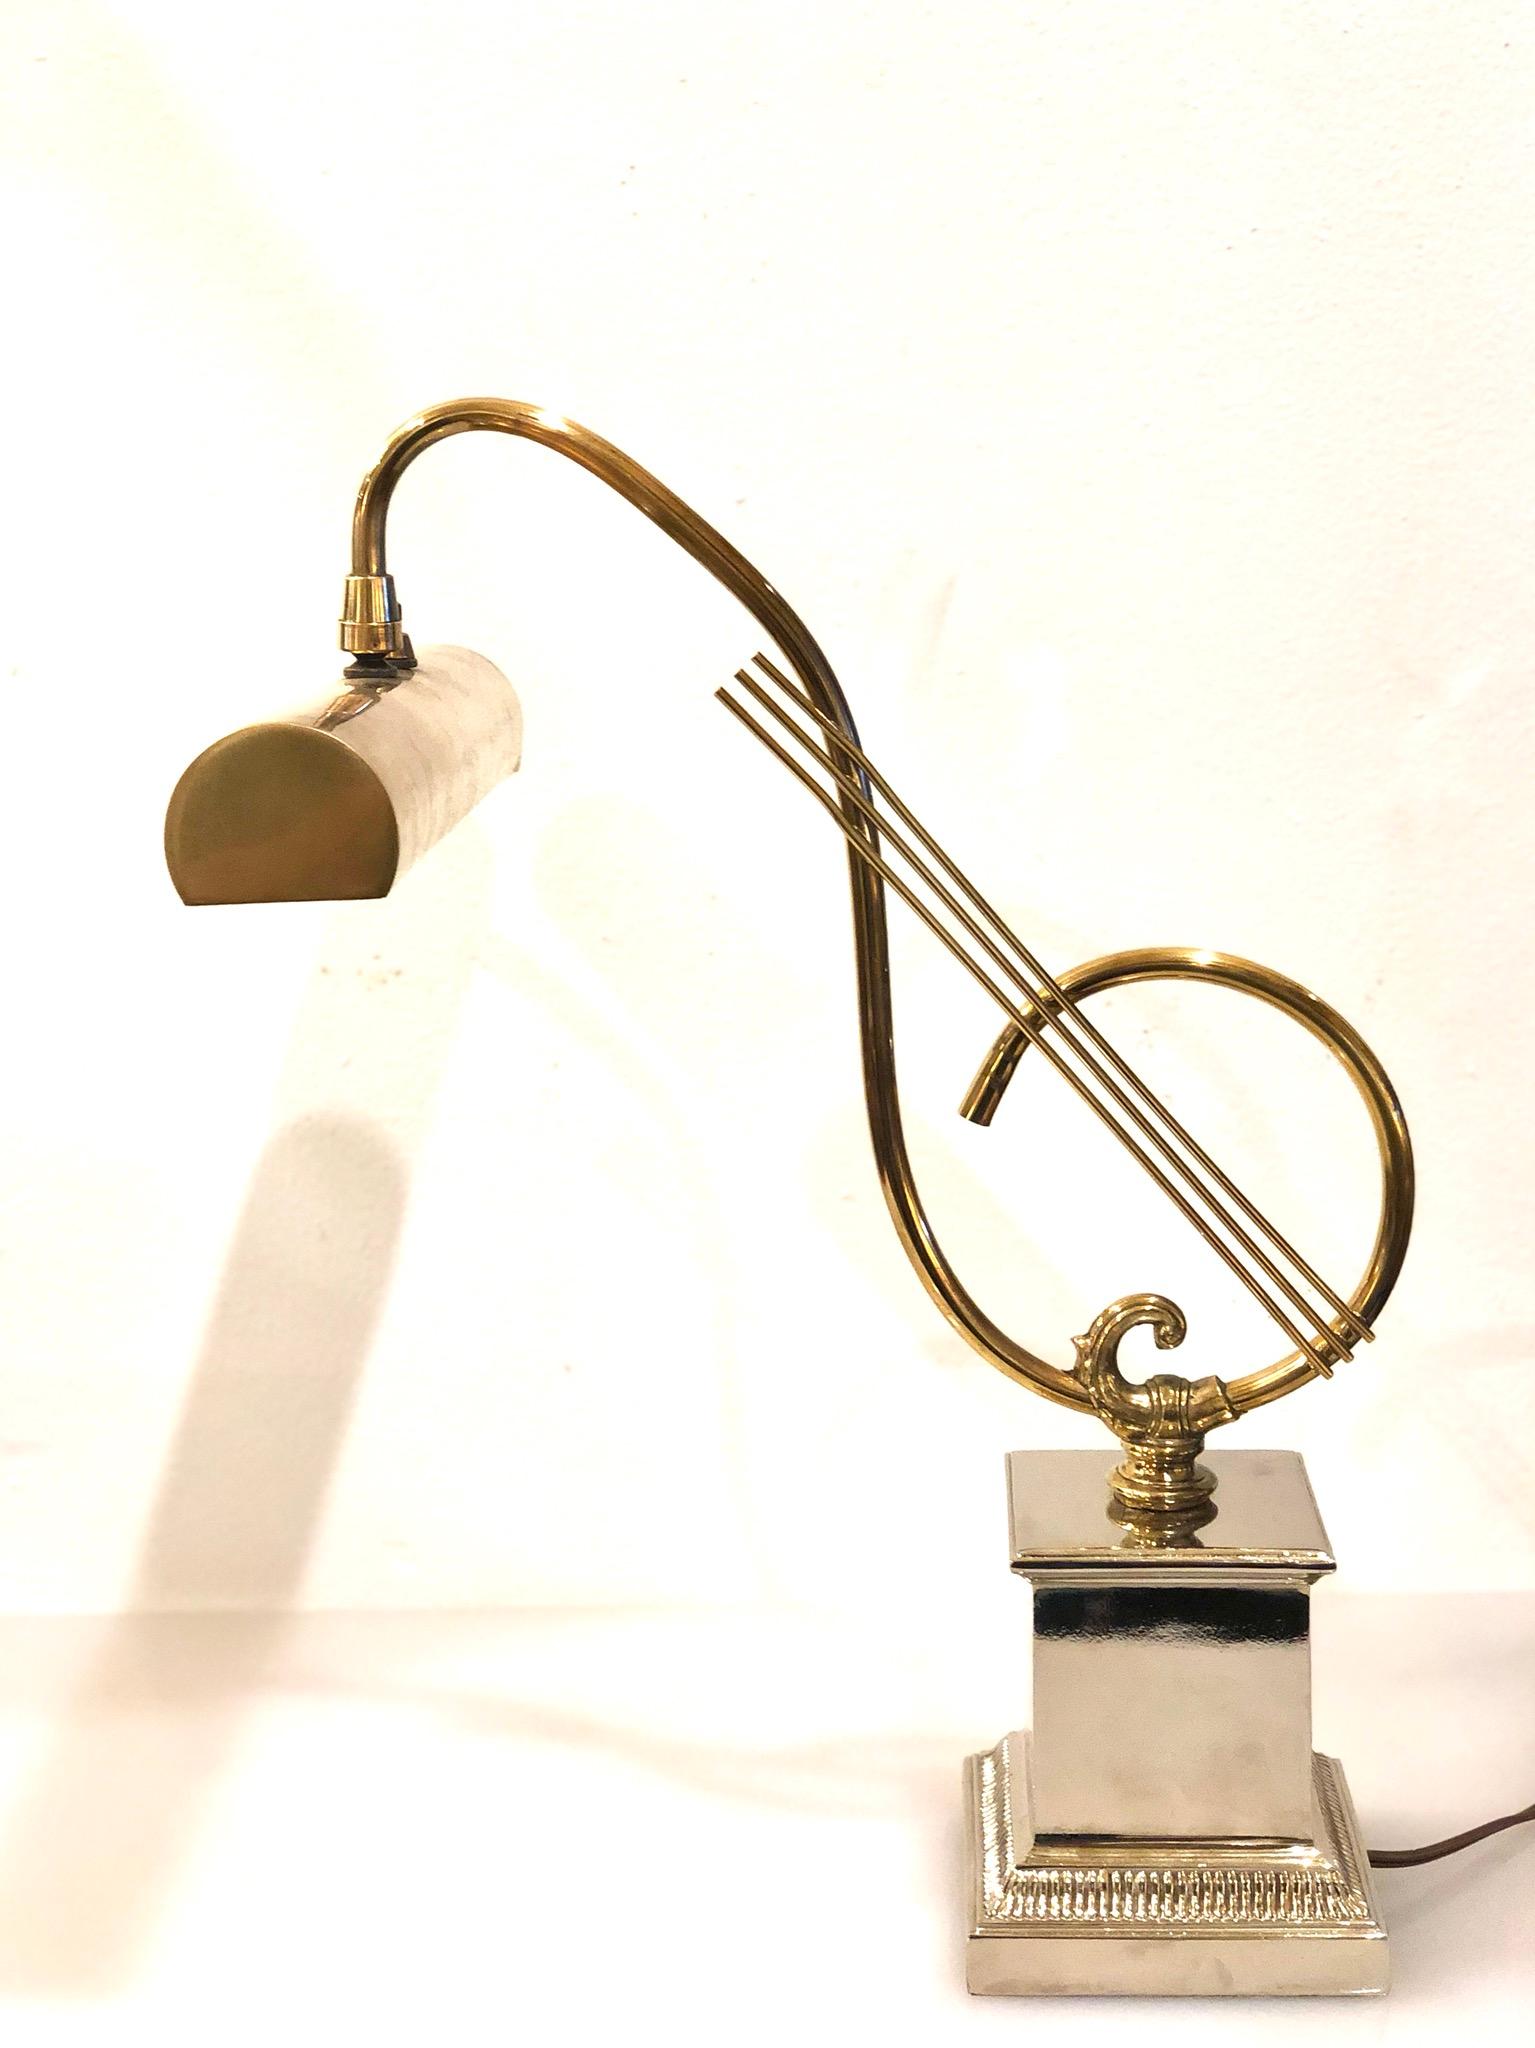 Beautiful polished brass musical note desk table lamp, by Laurel Lighting Company circa 1950s fluorescent light bulb freshly polished and rewired, retains its original label with manufacturer name.